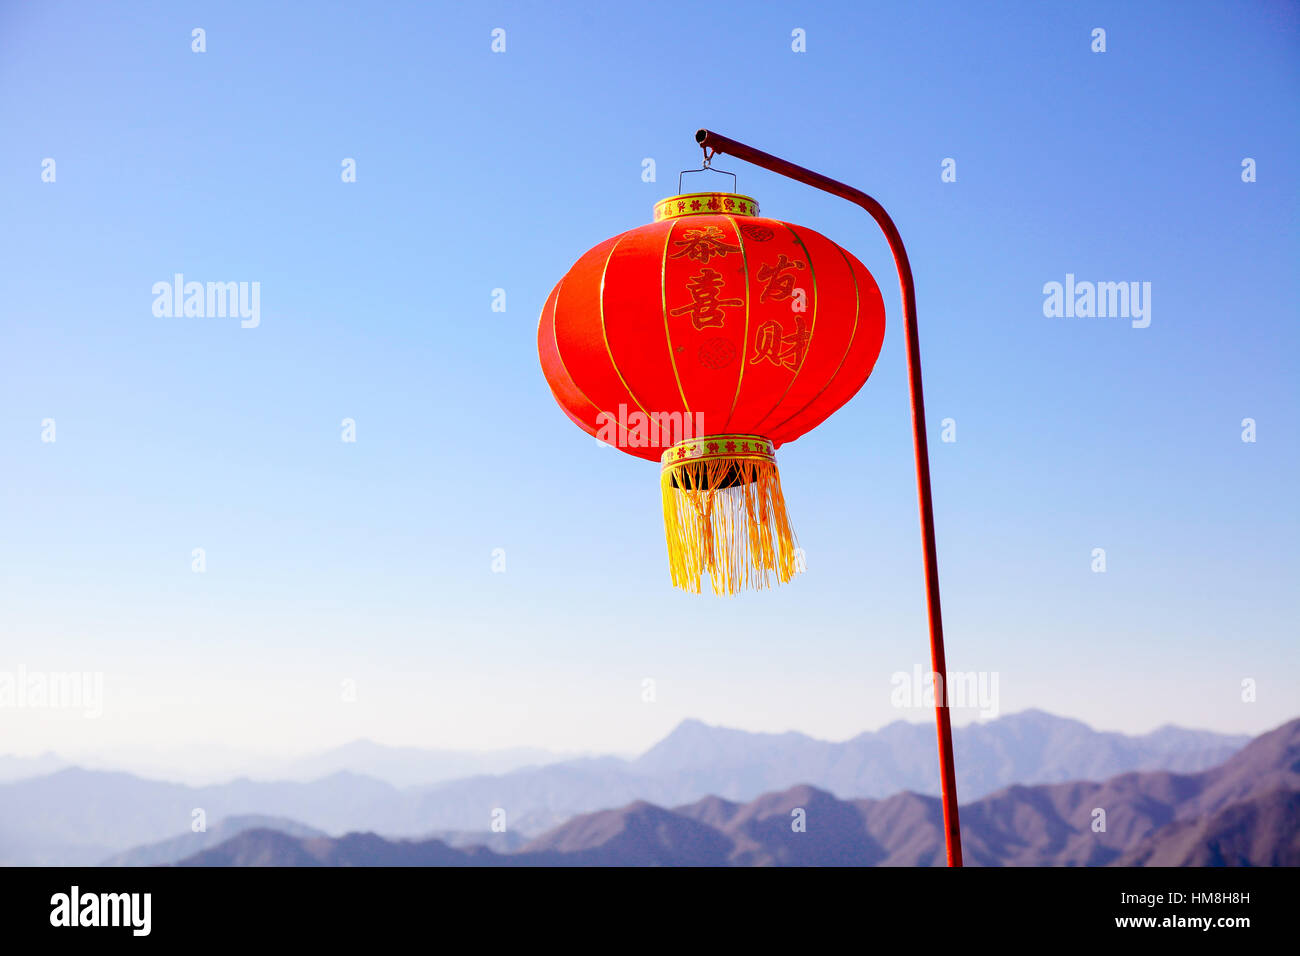 Chinese new year lantern hanging on the pole over blue sky and ...